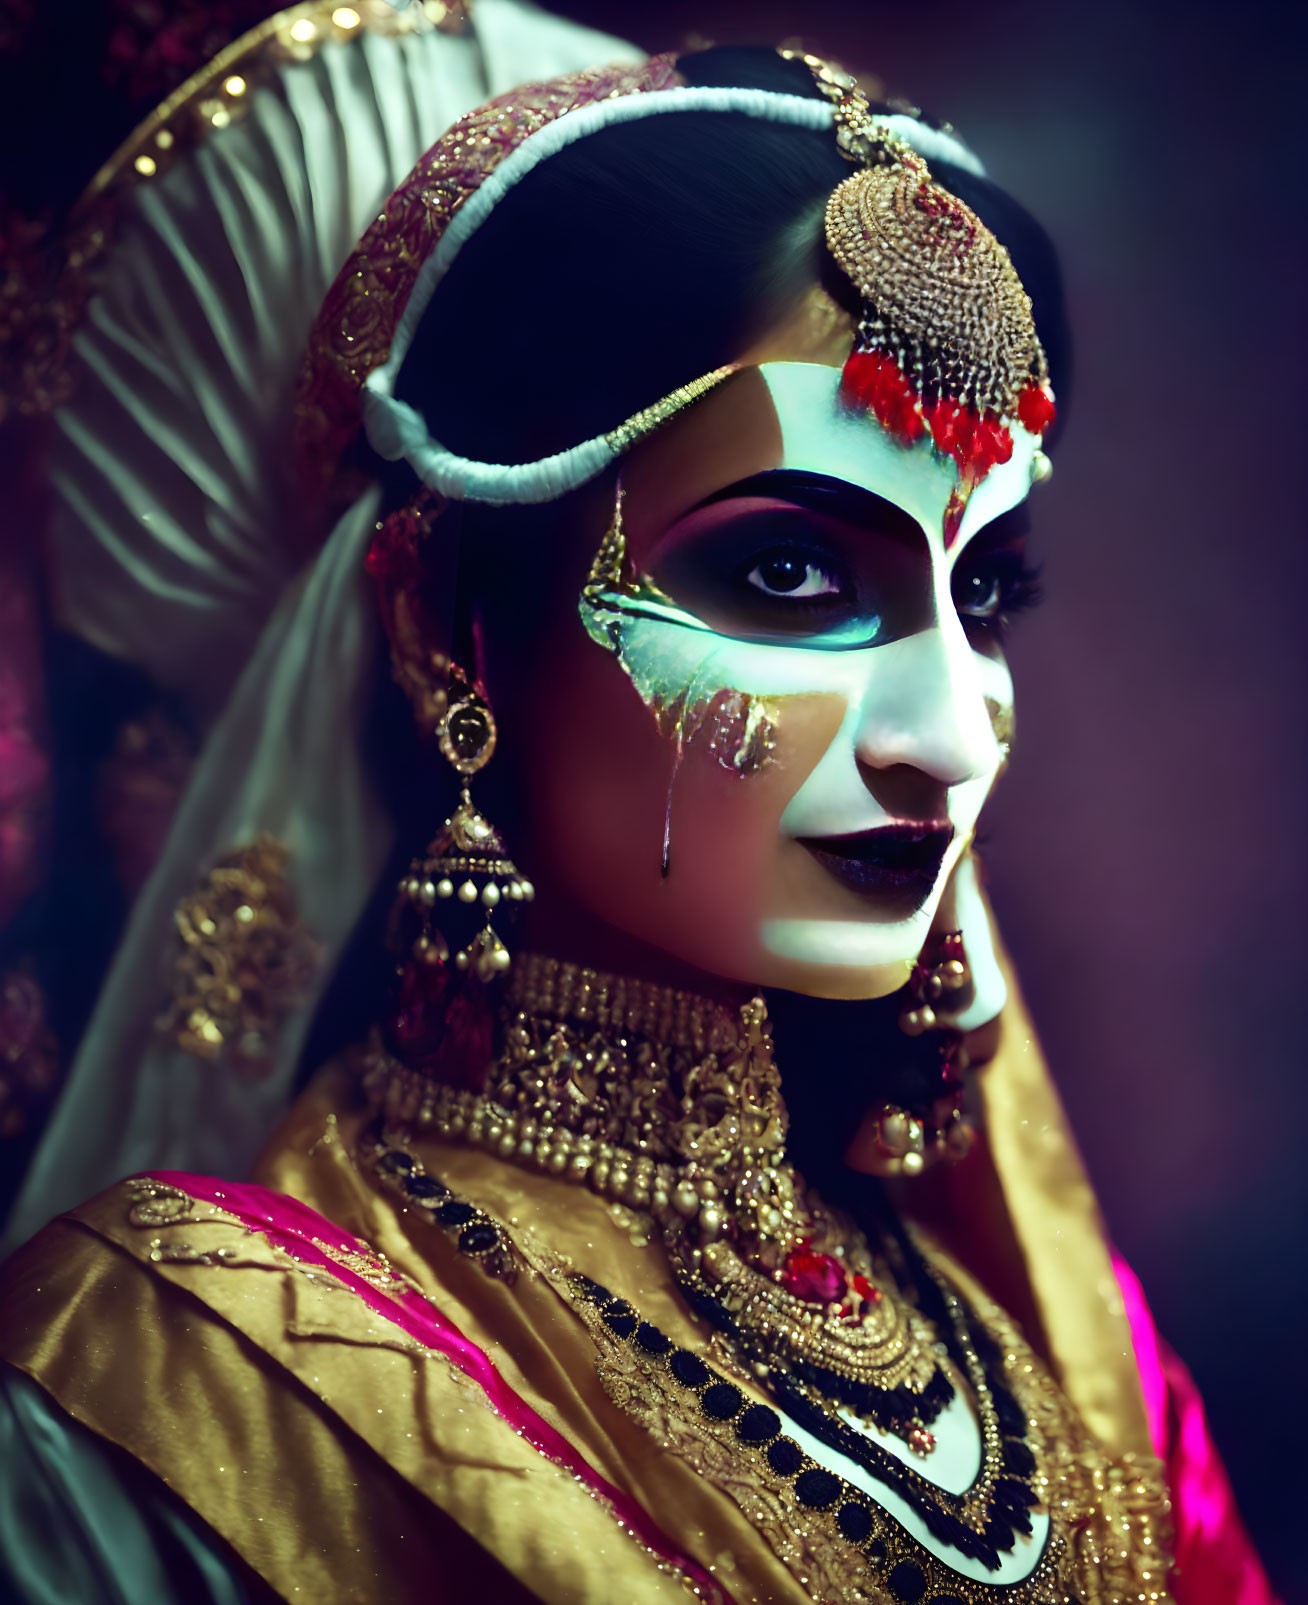 Traditional Indian Bridal Attire with Elaborate Gold Jewelry and Dramatic Eye Design